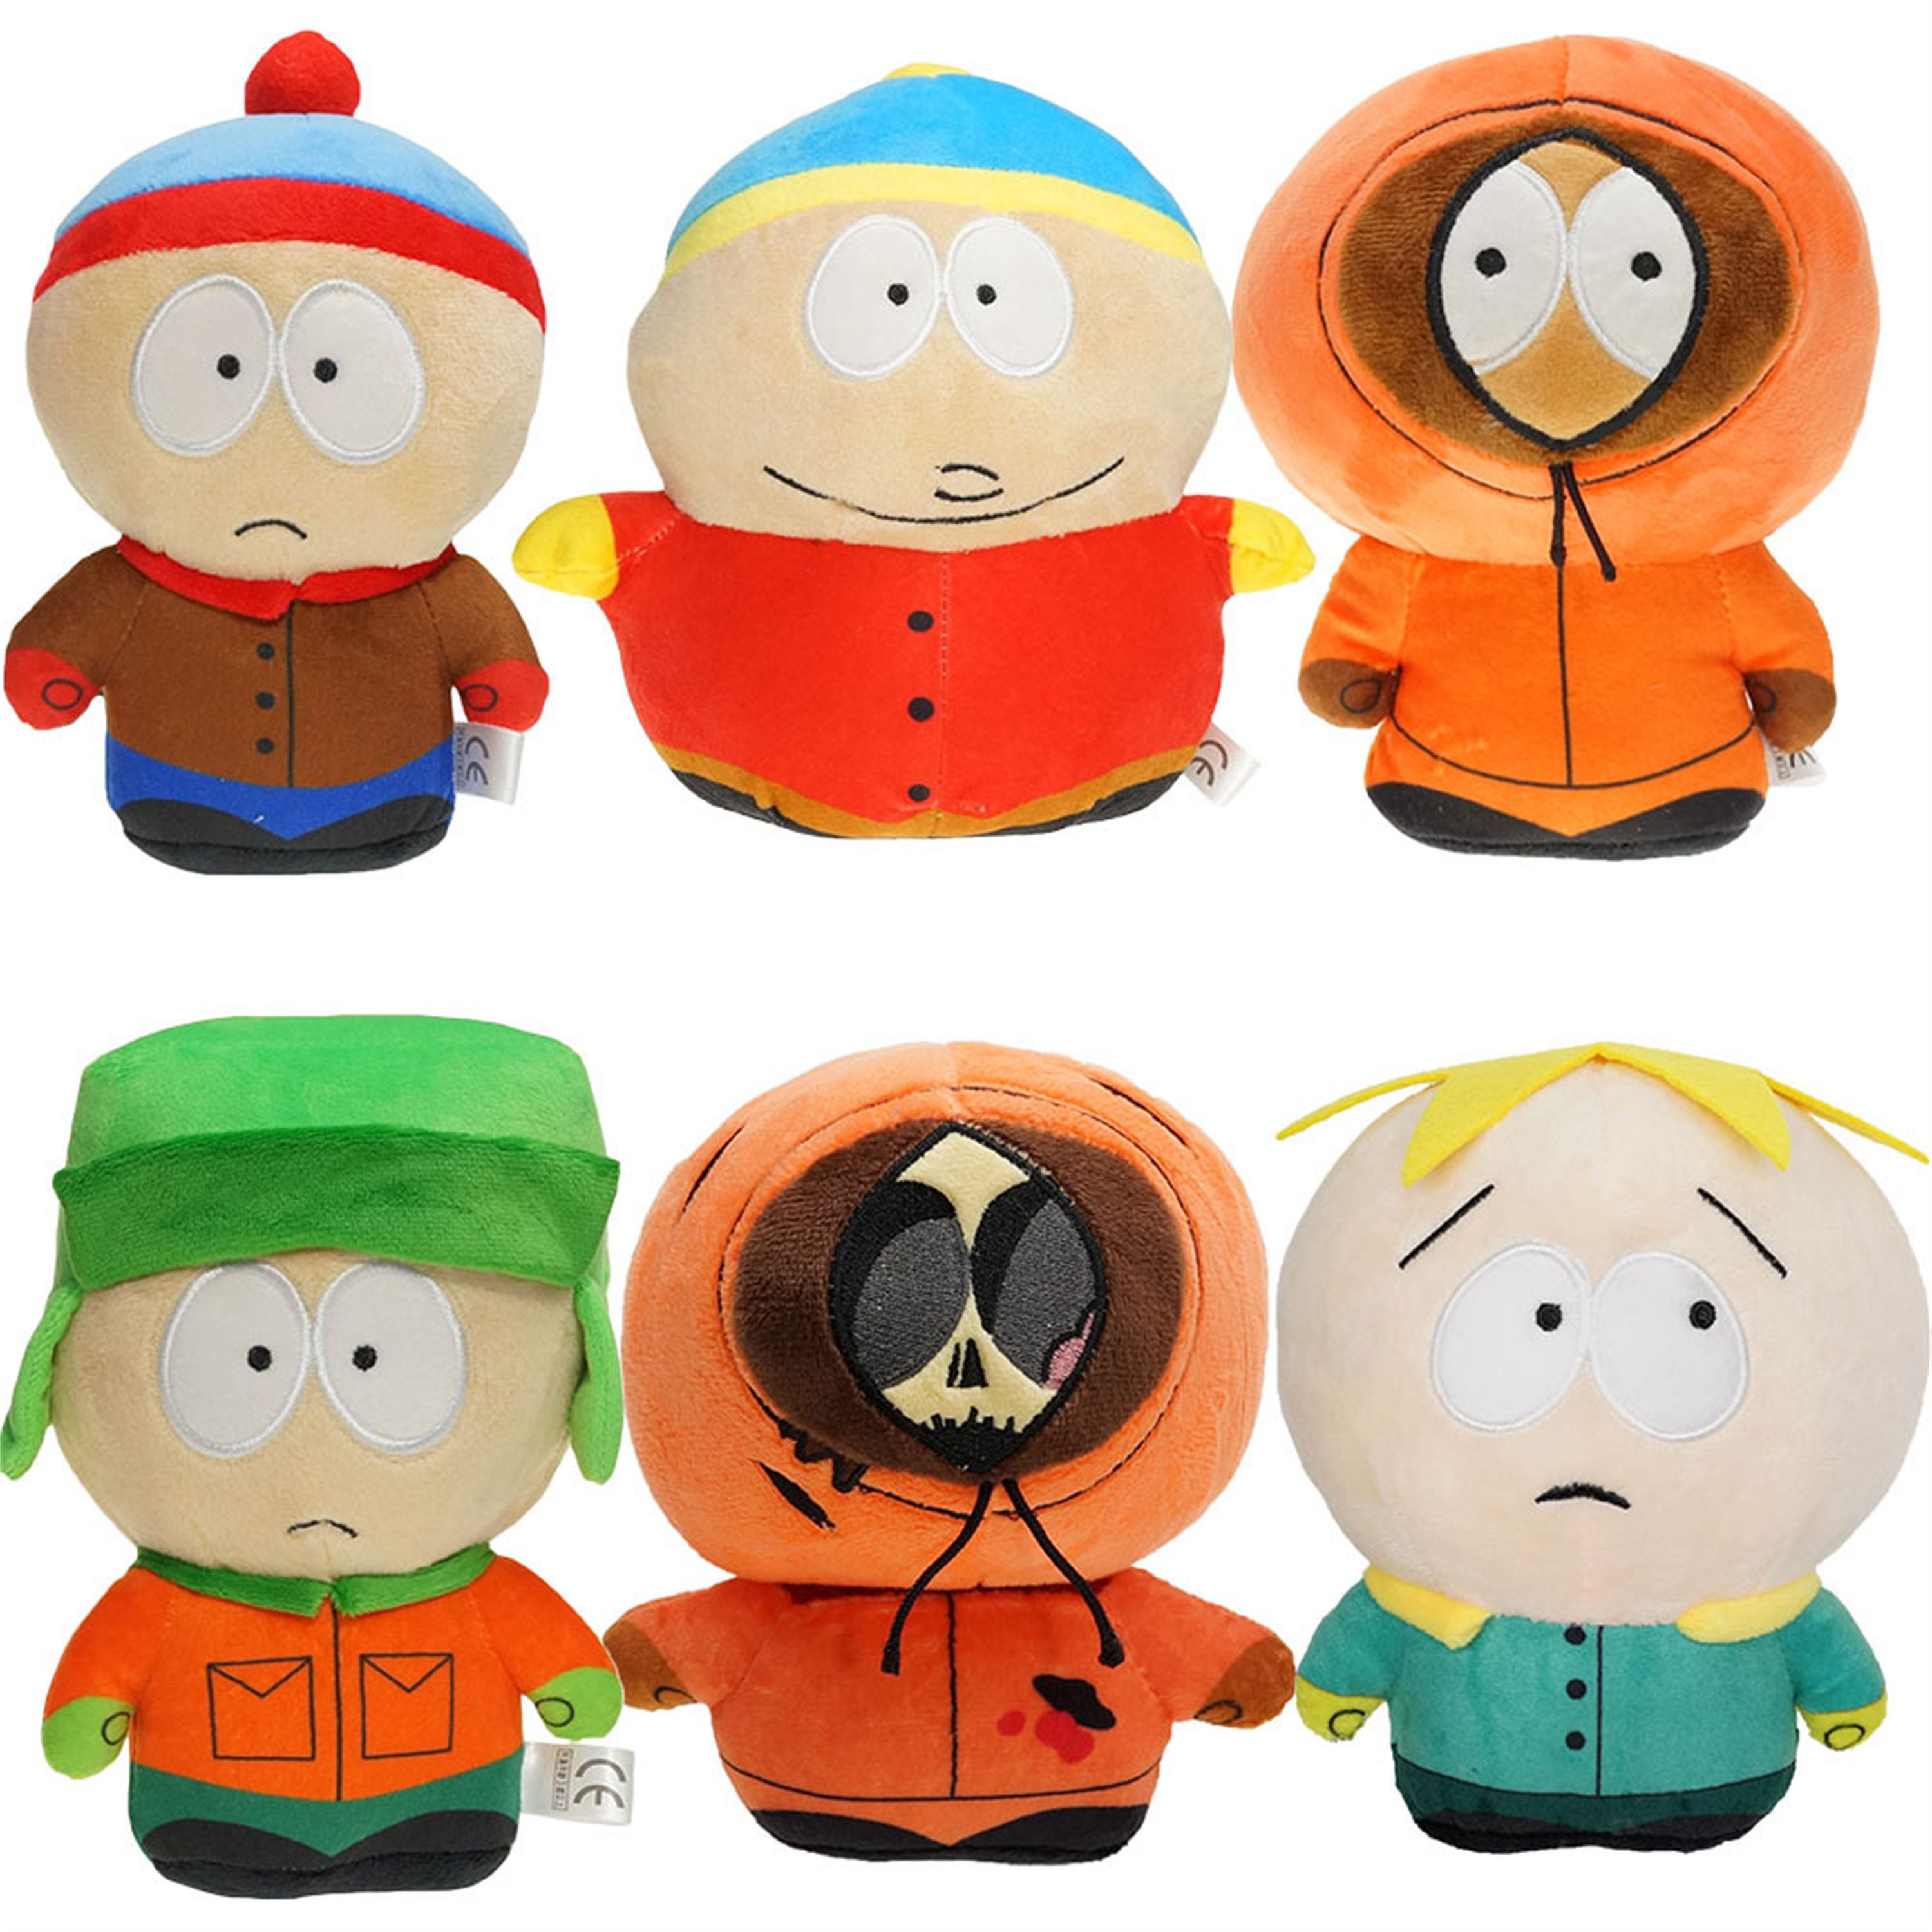 South Park Butters Plush | lupon.gov.ph